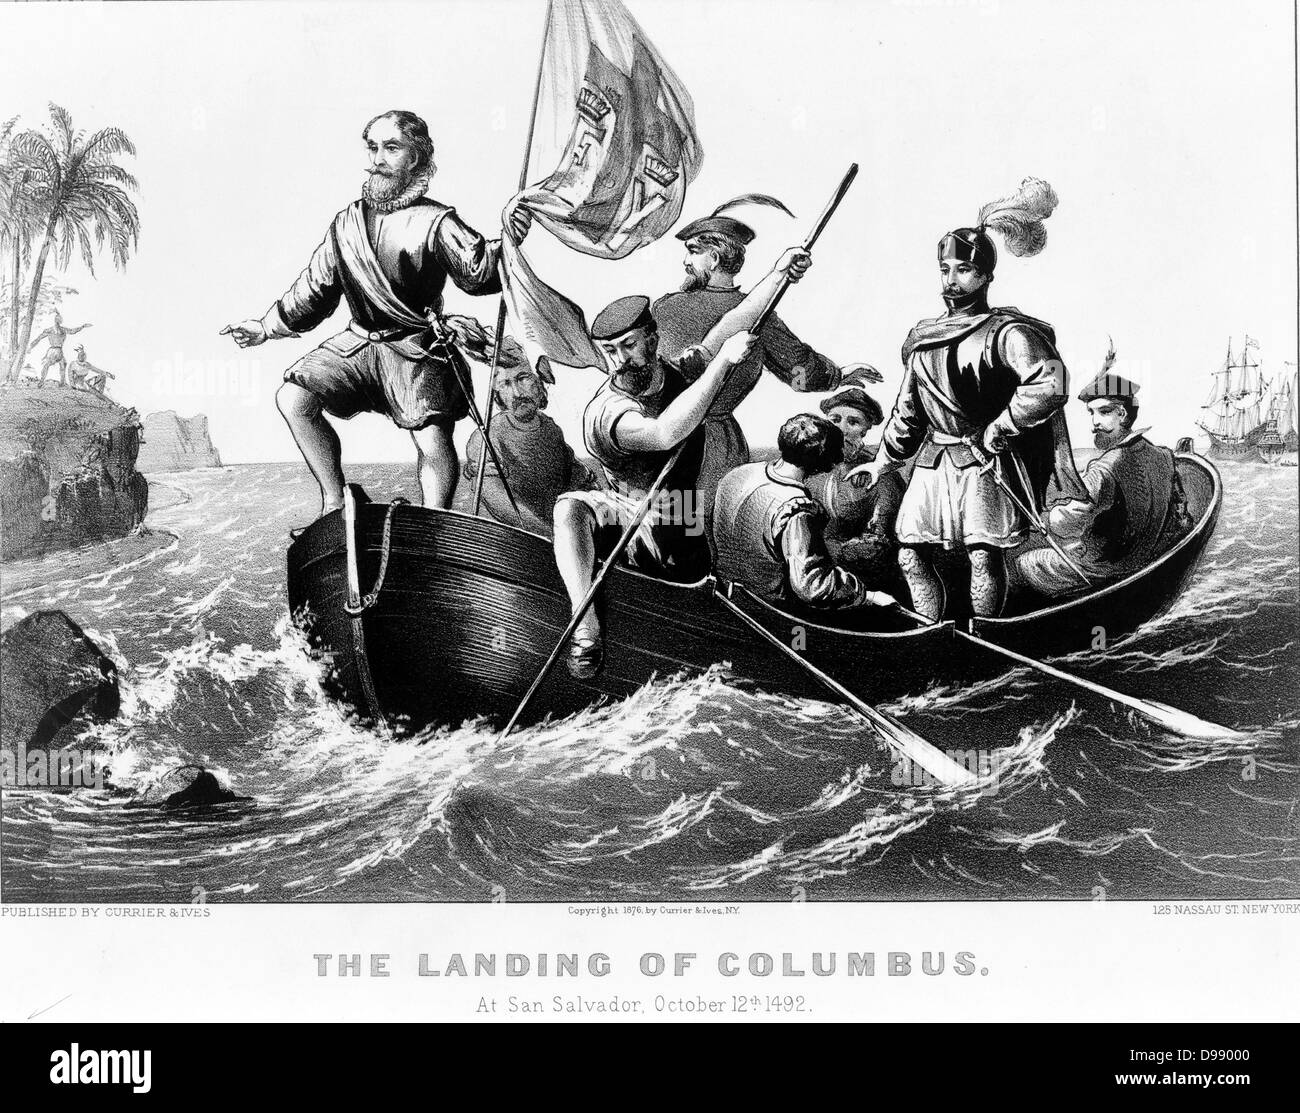 The landing of Columbus at San Salvador, October 12, 1492. Columbus standing in bow of boat holding Spanish flag. lithograph. New York : Published by Currier & Ives, c1876.Christopher Columbus (unknown; before 31 October 1451 – 20 May 1506) was an explorer, colonizer, and navigator, born in the Republic of Genoa, in what is today northwestern Italy.[2][3][4][5] Under the auspices of the Catholic Monarchs of Spain, he completed four voyages across the Atlantic Ocean that led to general European awareness of the American continents in the Western Hemisphere Stock Photo